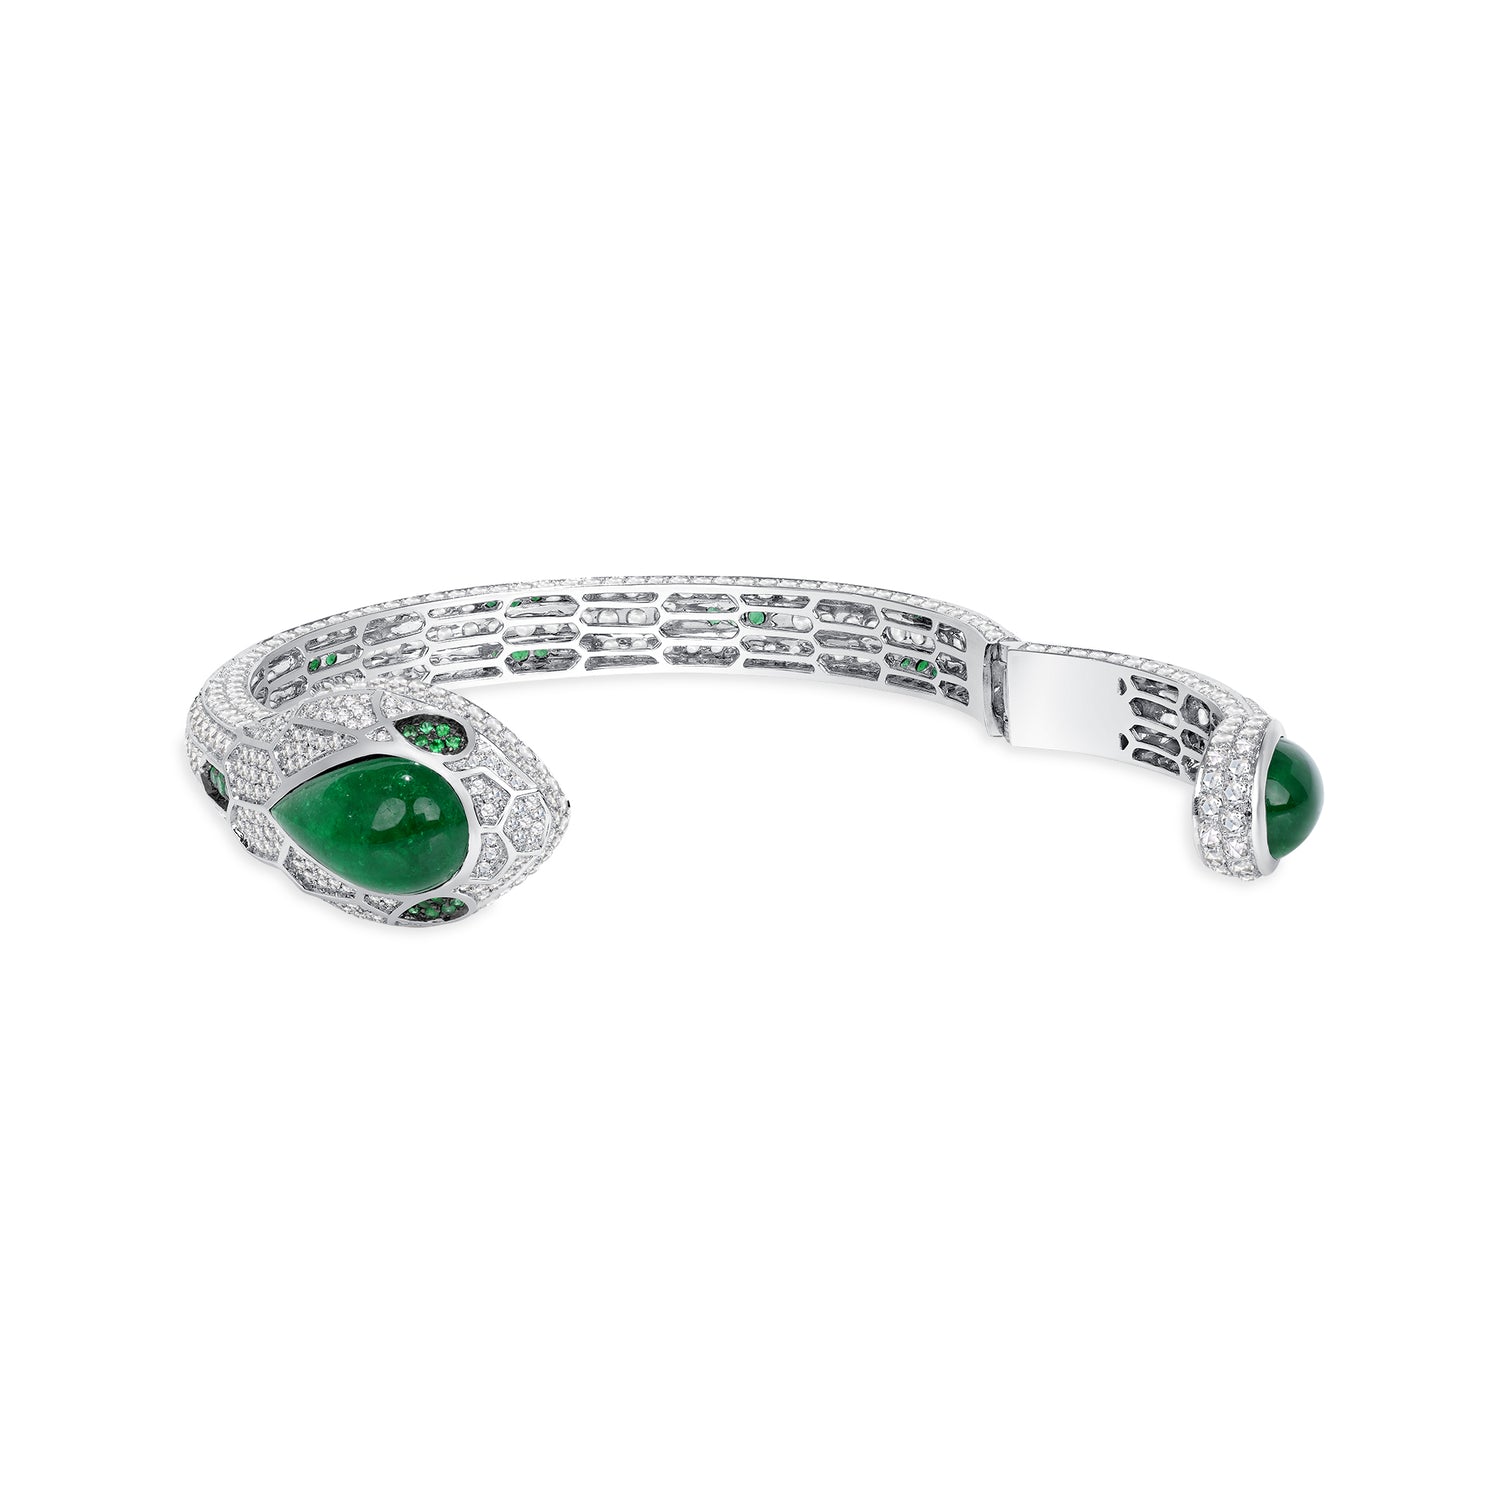 Pear Shape Cabochon Colombian Emerald and Diamond Melee Snake Cuff Bracelet